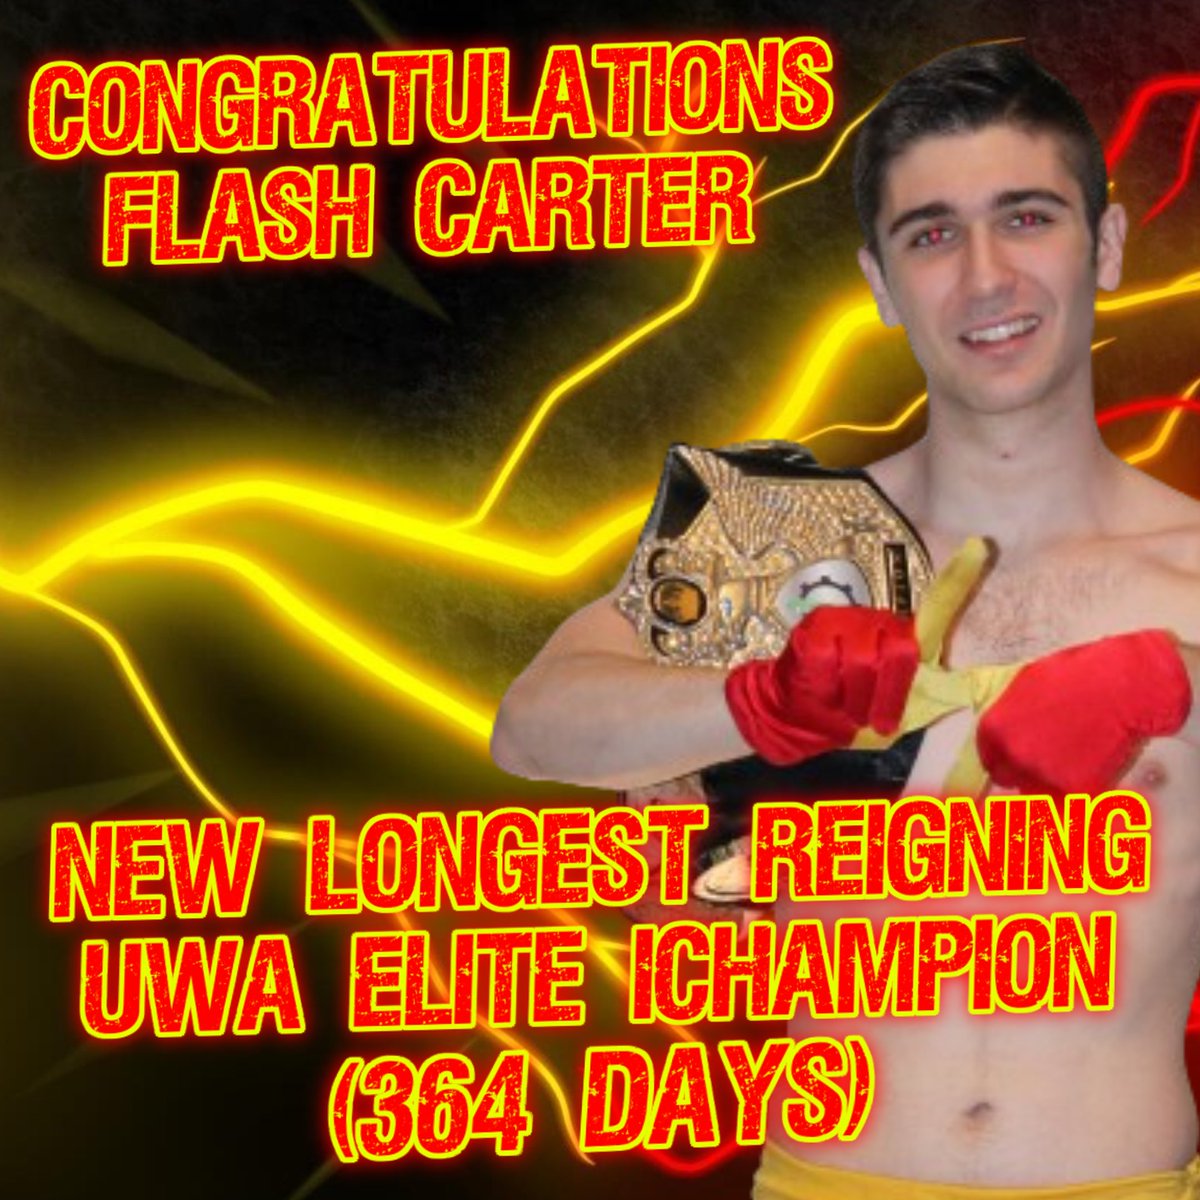 Congratulations to Flash Carter on becoming the new longest reigning UWA Elite iChampion of all time! Flash Carter defeated Joey Adams to capture the UWA Elite iChampionship in a Best 2 out of 3 Falls Match at UWA Elite Gold Rush 2023. Relive that match for free right now at: